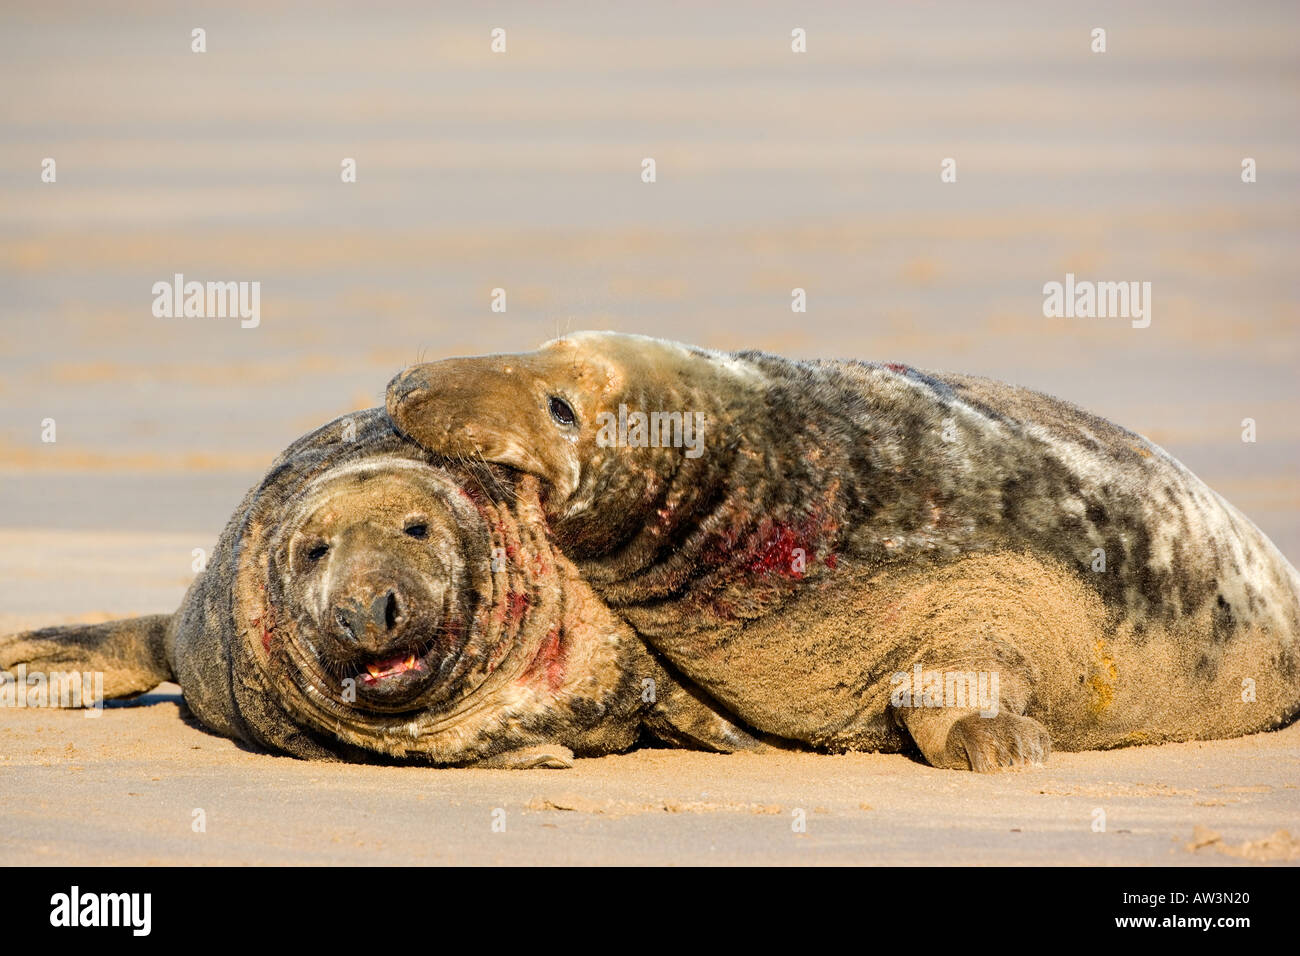 Grey Seal Halichoerus grypus Bulls Fighting on sand bar donna nook lincolnshire Stock Photo